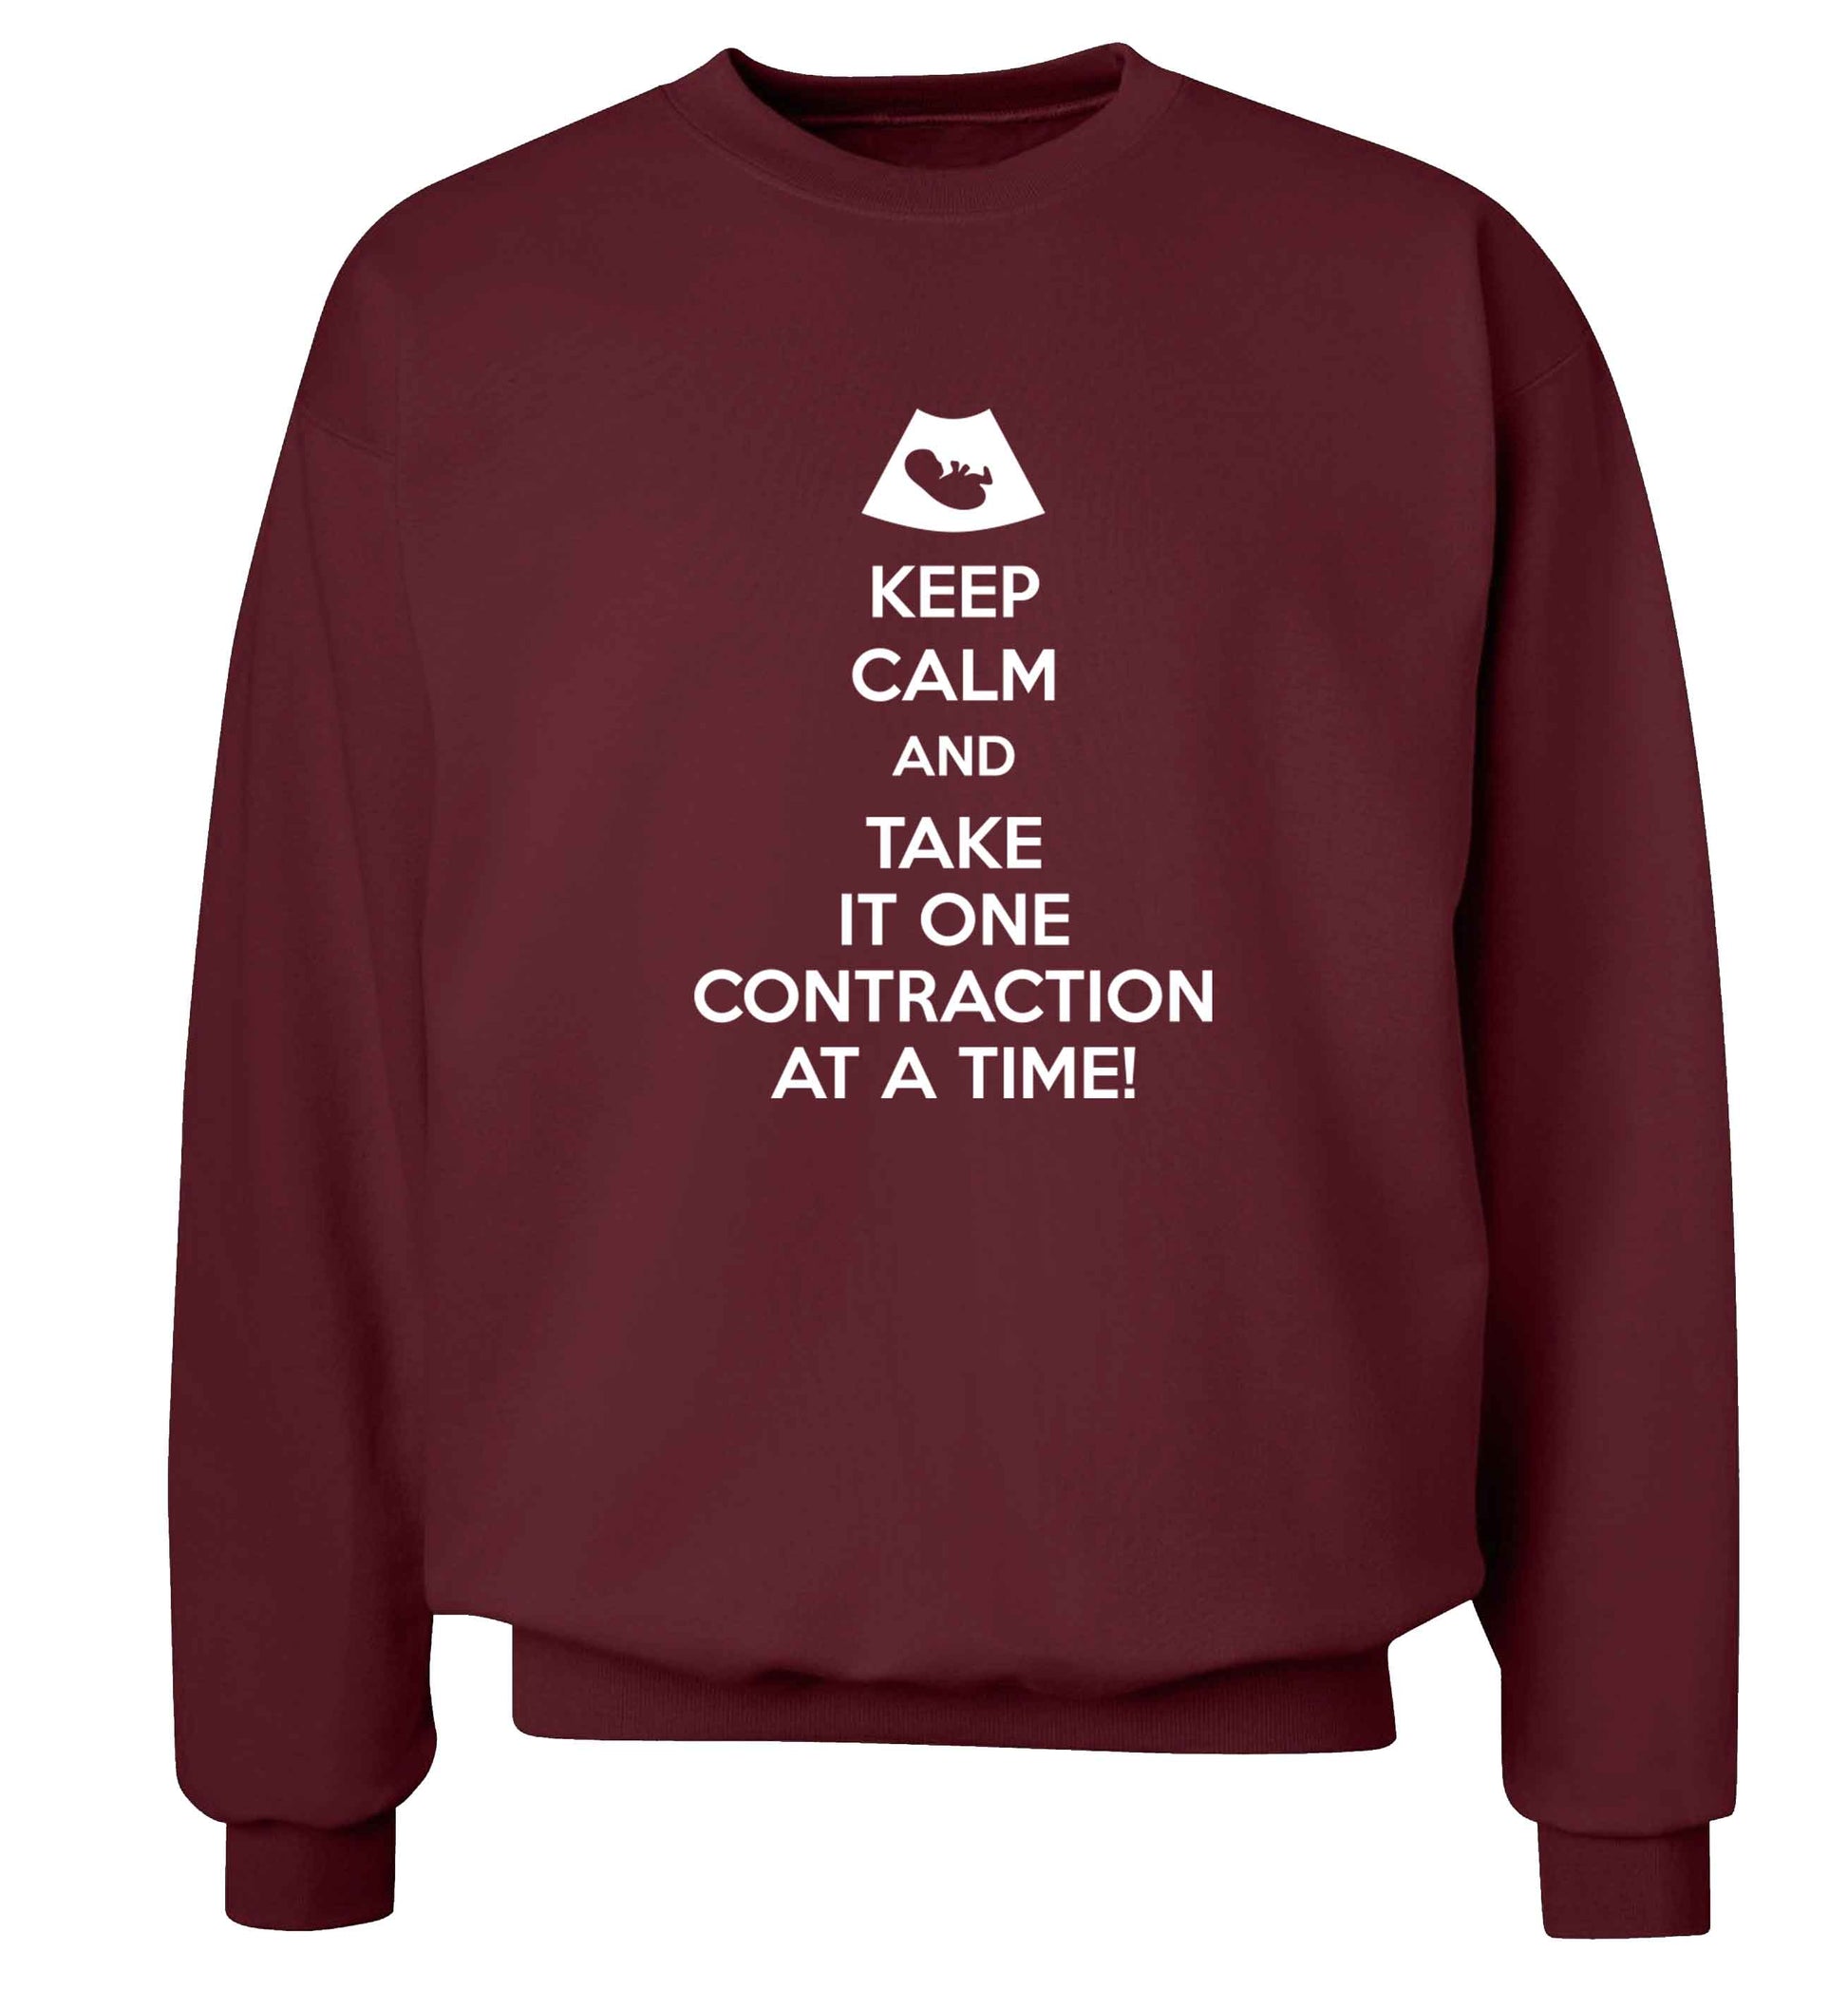 Keep calm and take it one contraction at a time Adult's unisex maroon Sweater 2XL